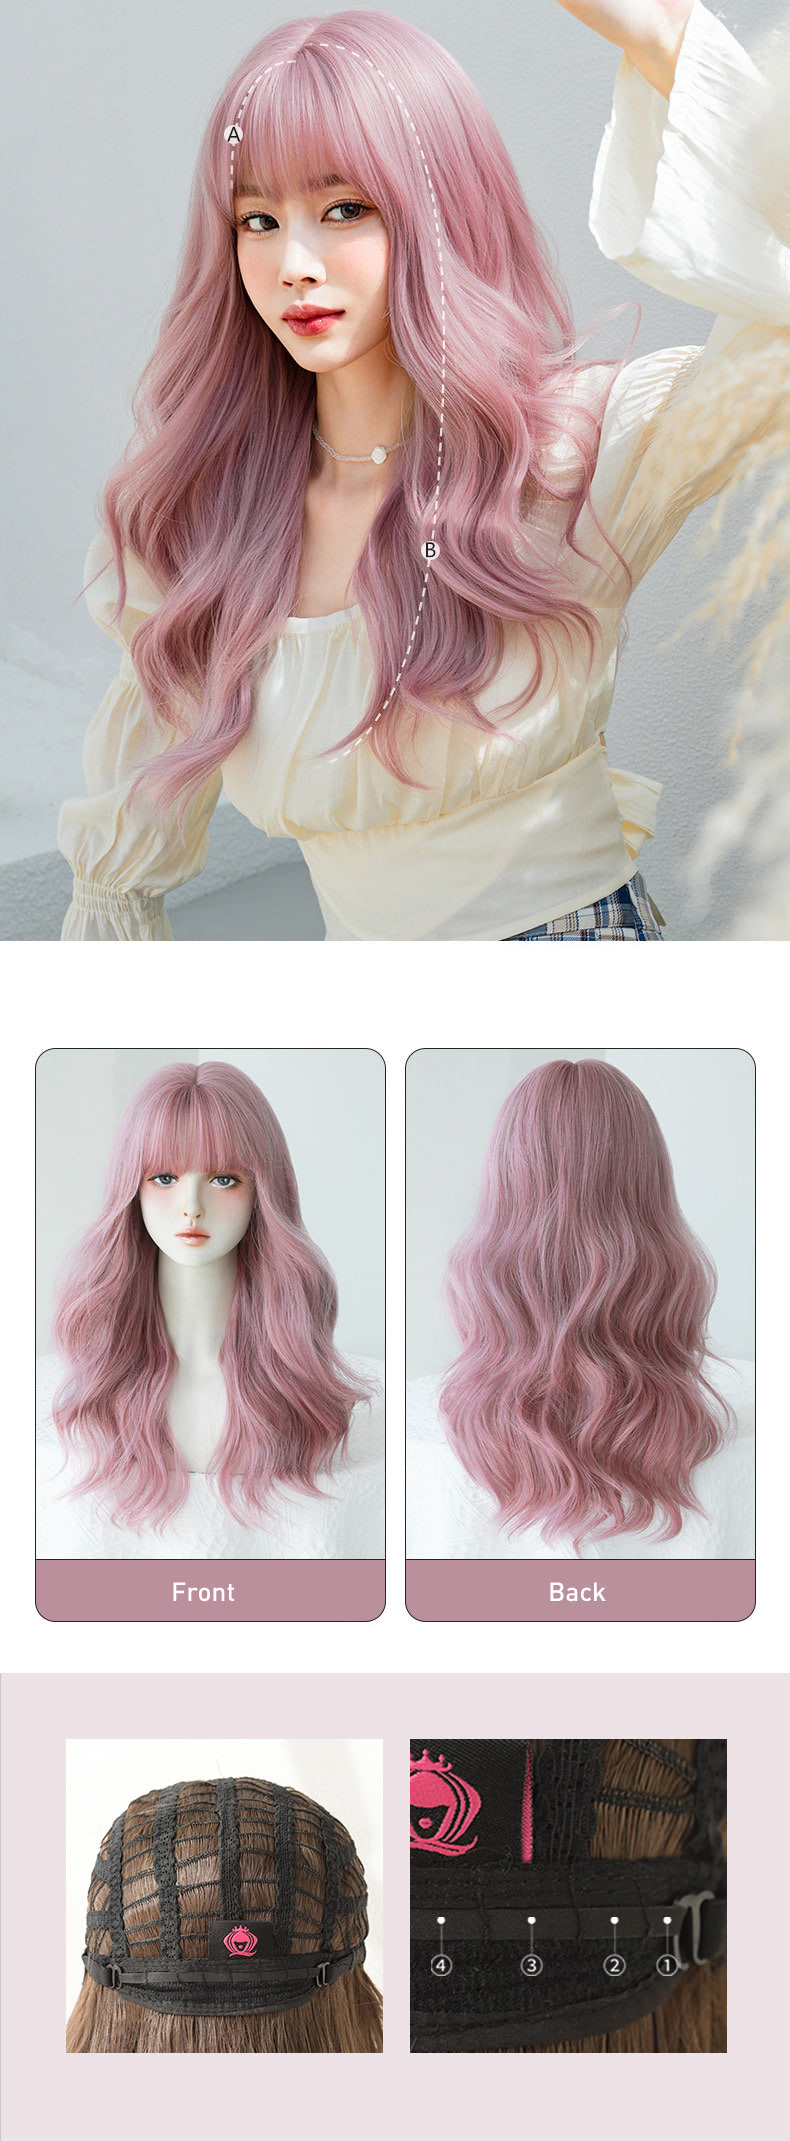 Lolita Pink Wavy Wig with Bangs for Daily Party Actress Wear07